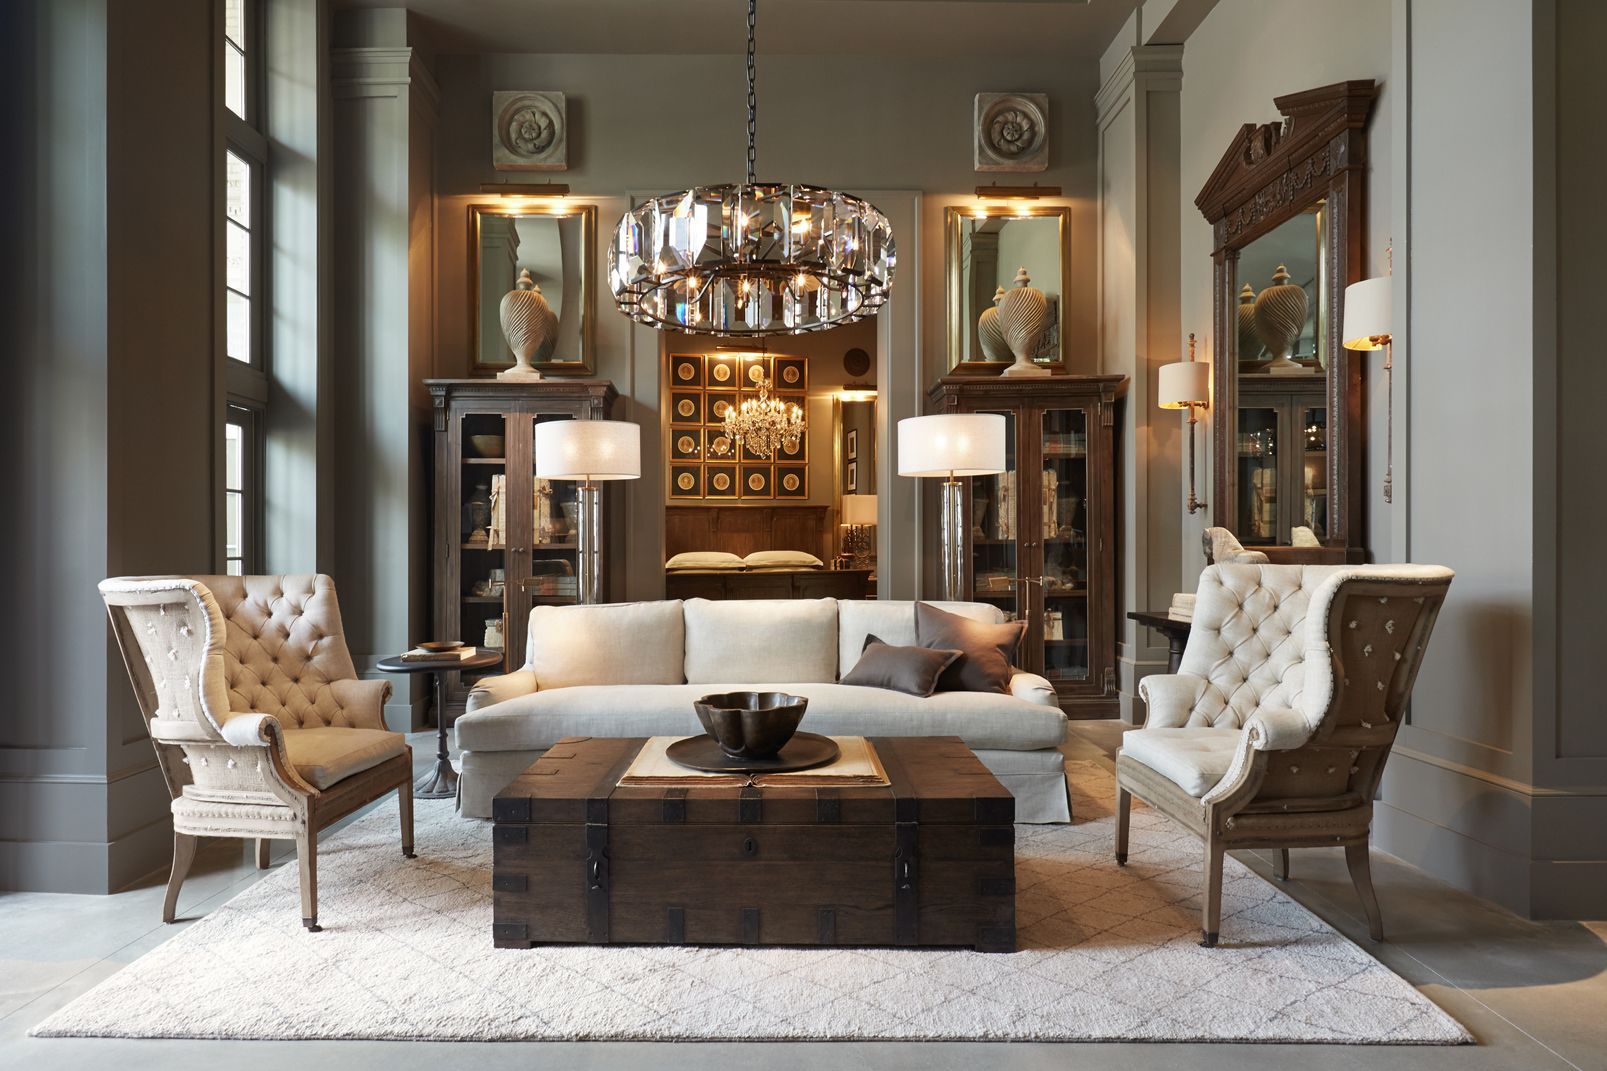 Affordable Ways To Add Luxury Furniture Brands To Your Home